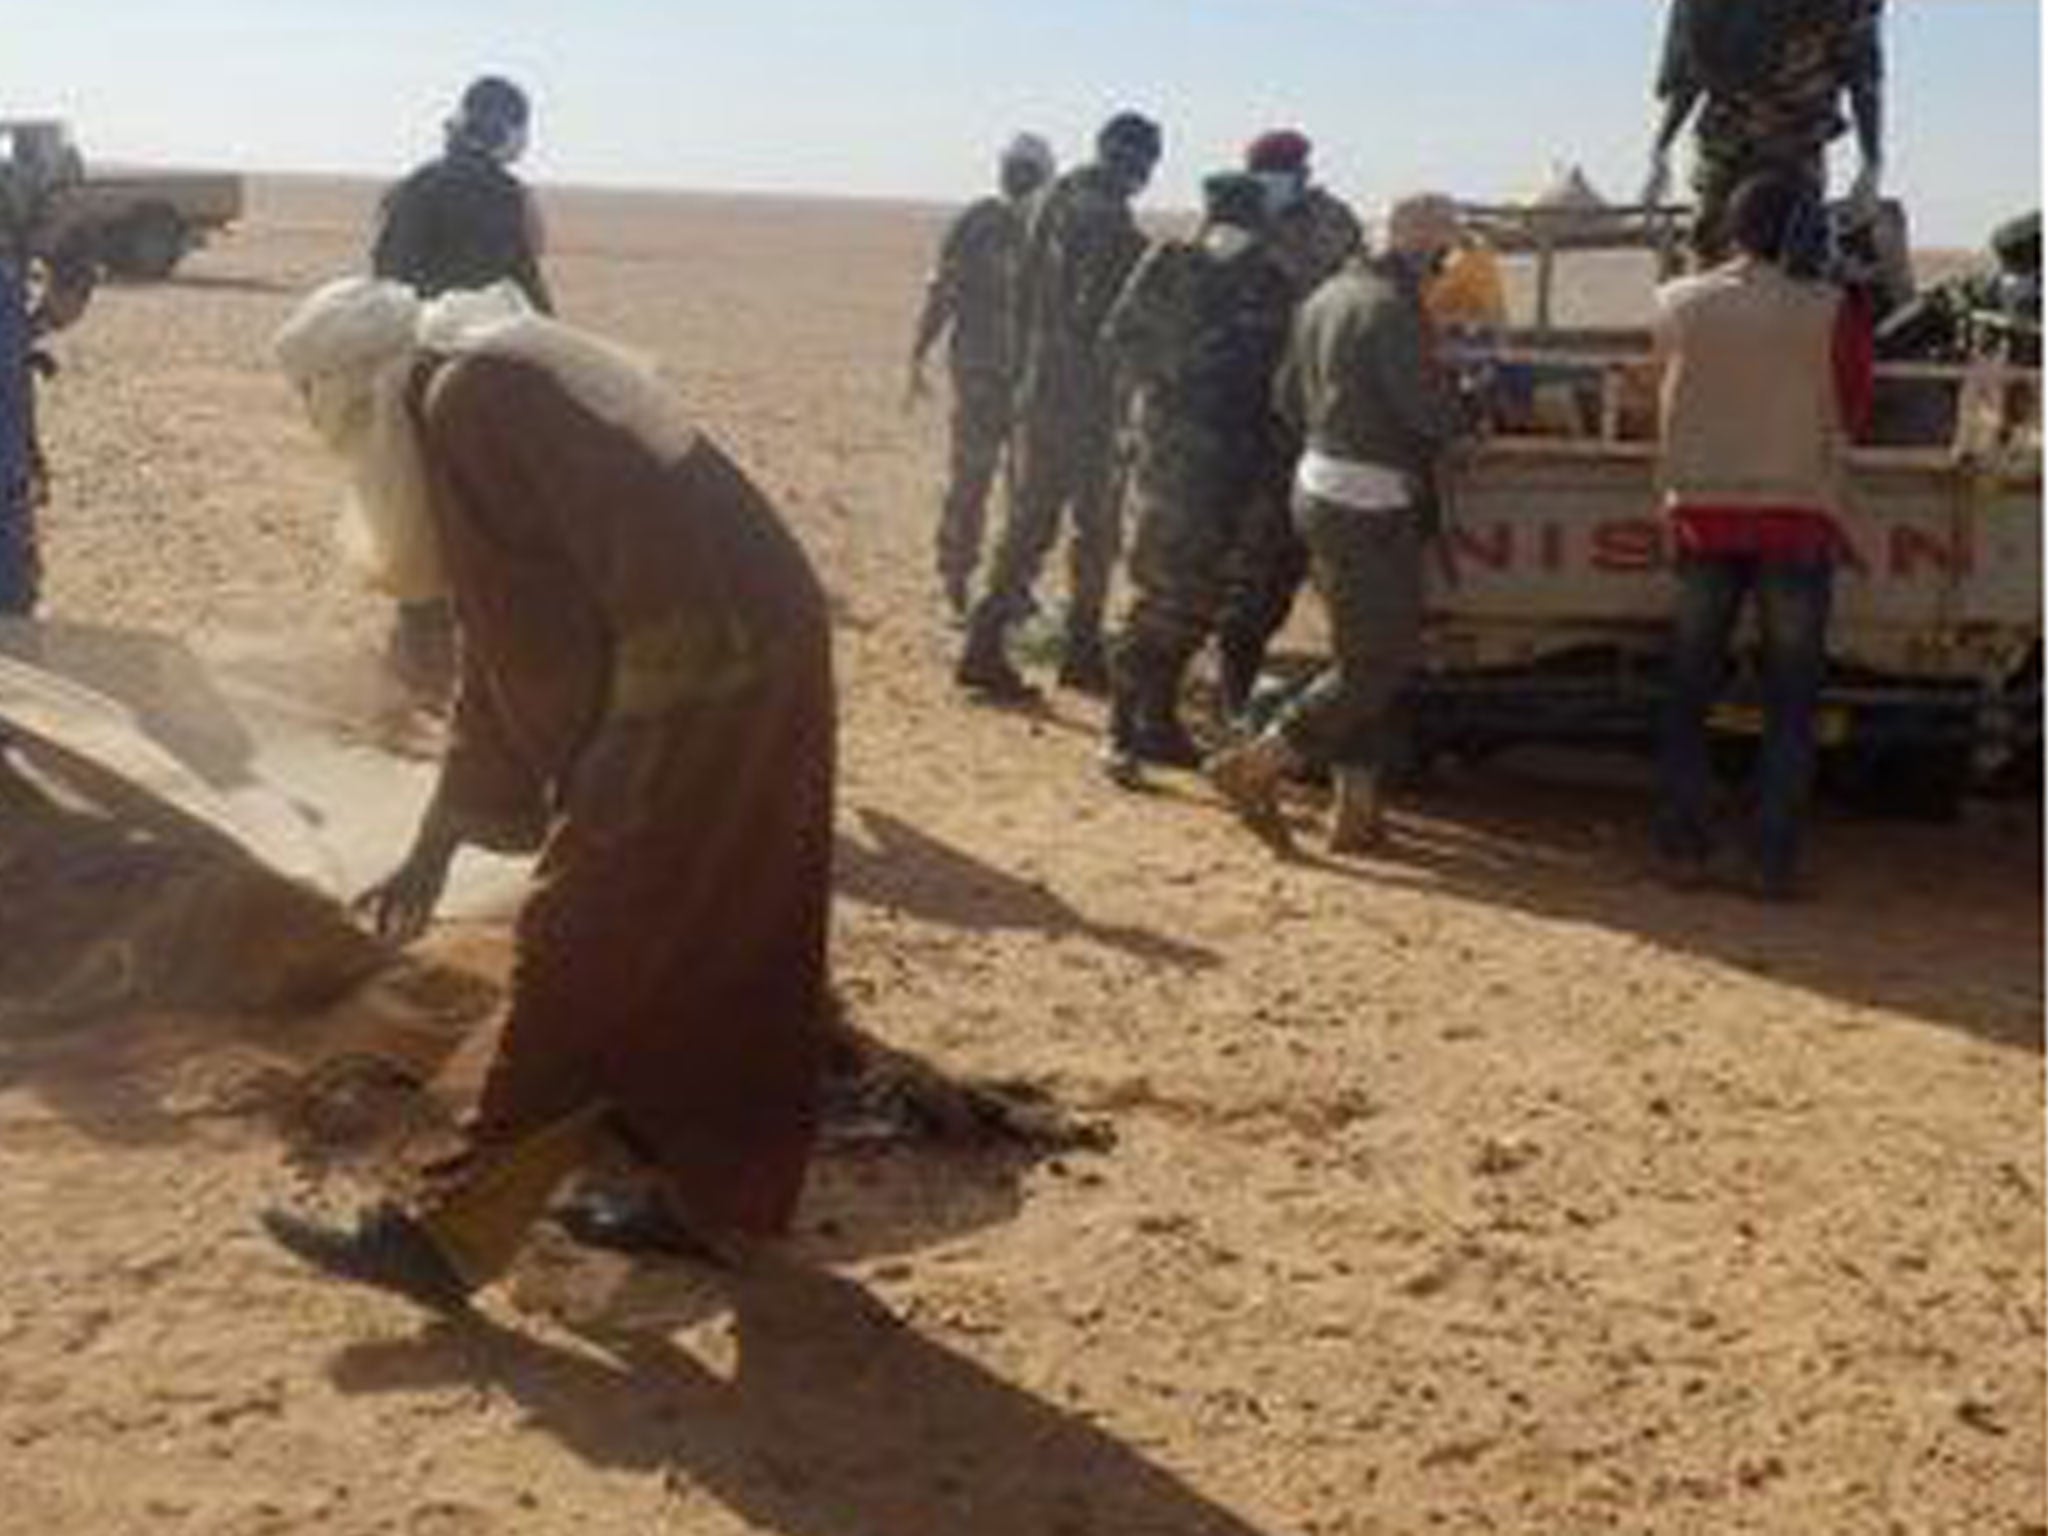 Rescue workers in the Sahara desert, where the bodies of 92 immigrants were discovered